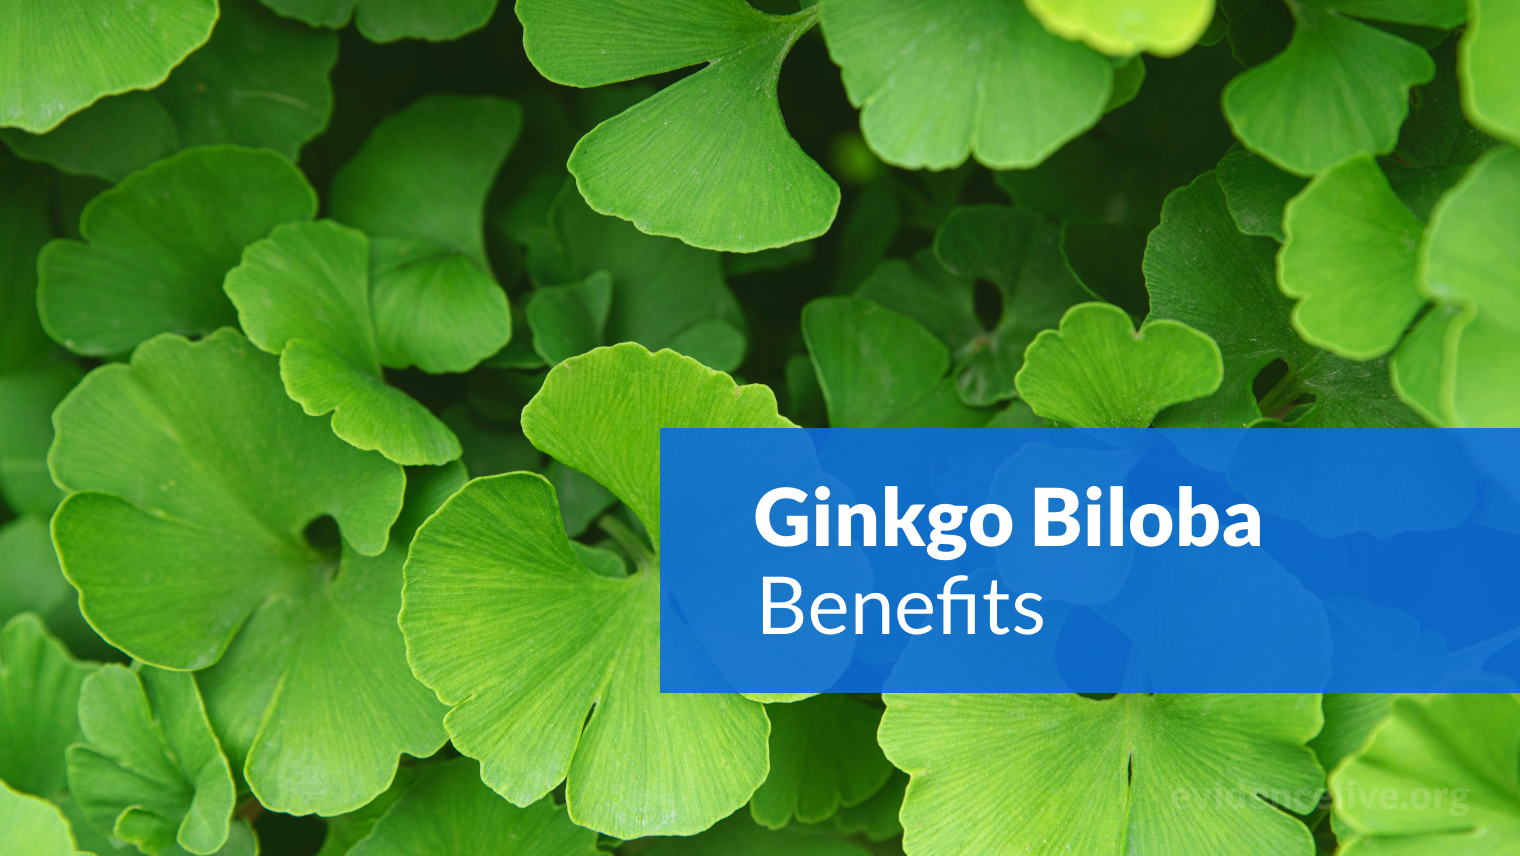 Ginkgo Biloba: Benefits, Uses, Dosage, and Side Effects